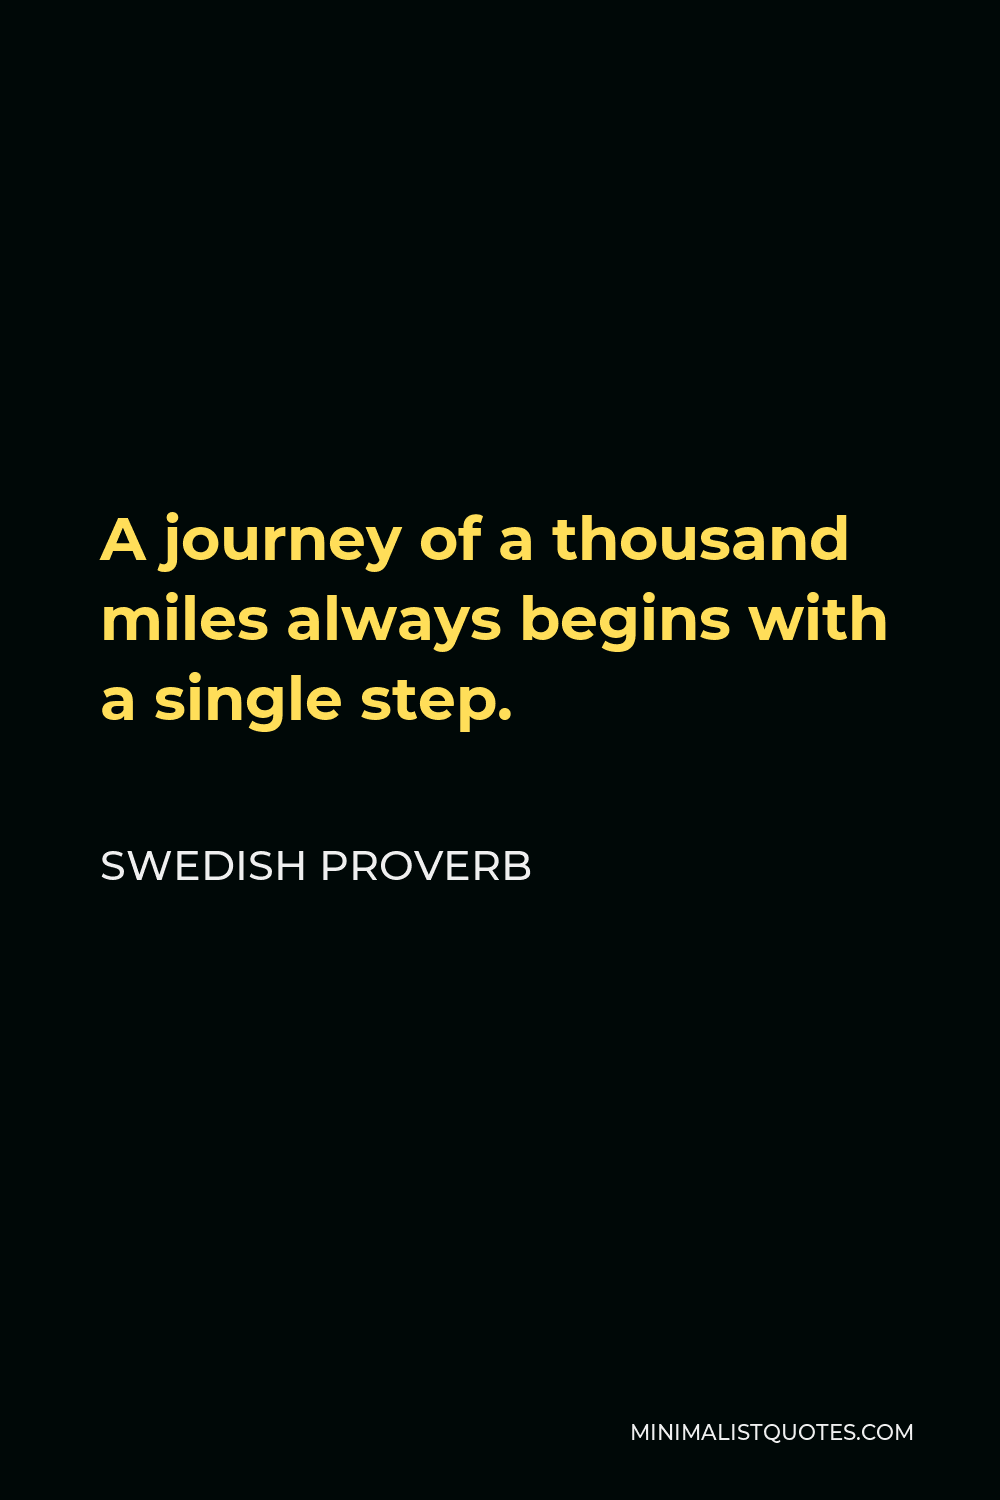 Swedish Proverb Quote - A journey of a thousand miles always begins with a single step.